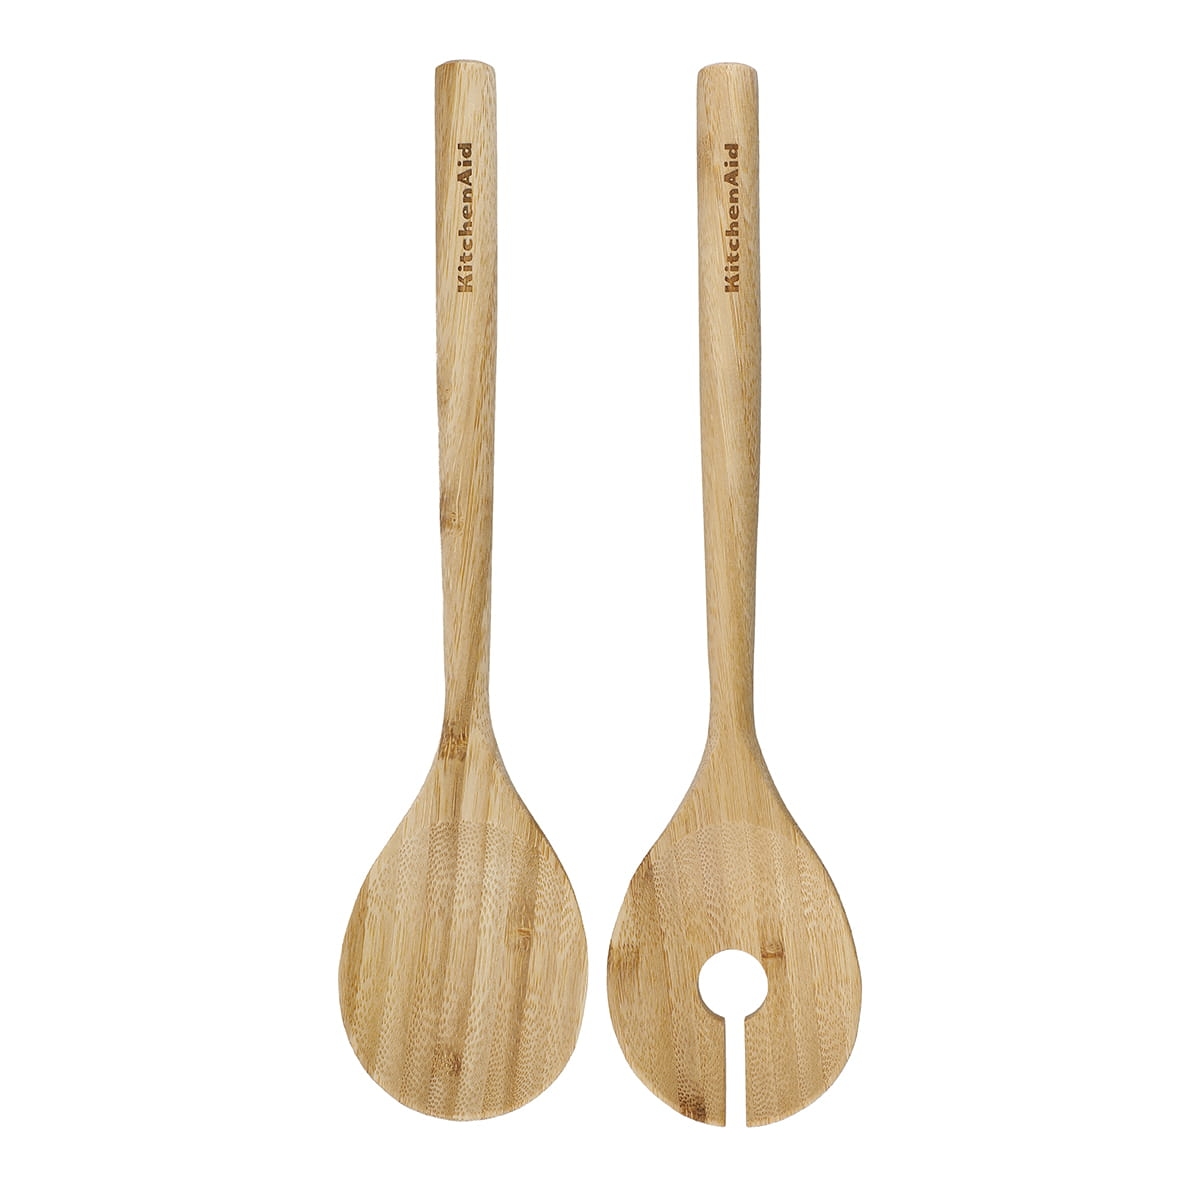 Kitchen Aid Bamboo Salad Server Set RRP 10.58 CLEARANCE XL 6.99